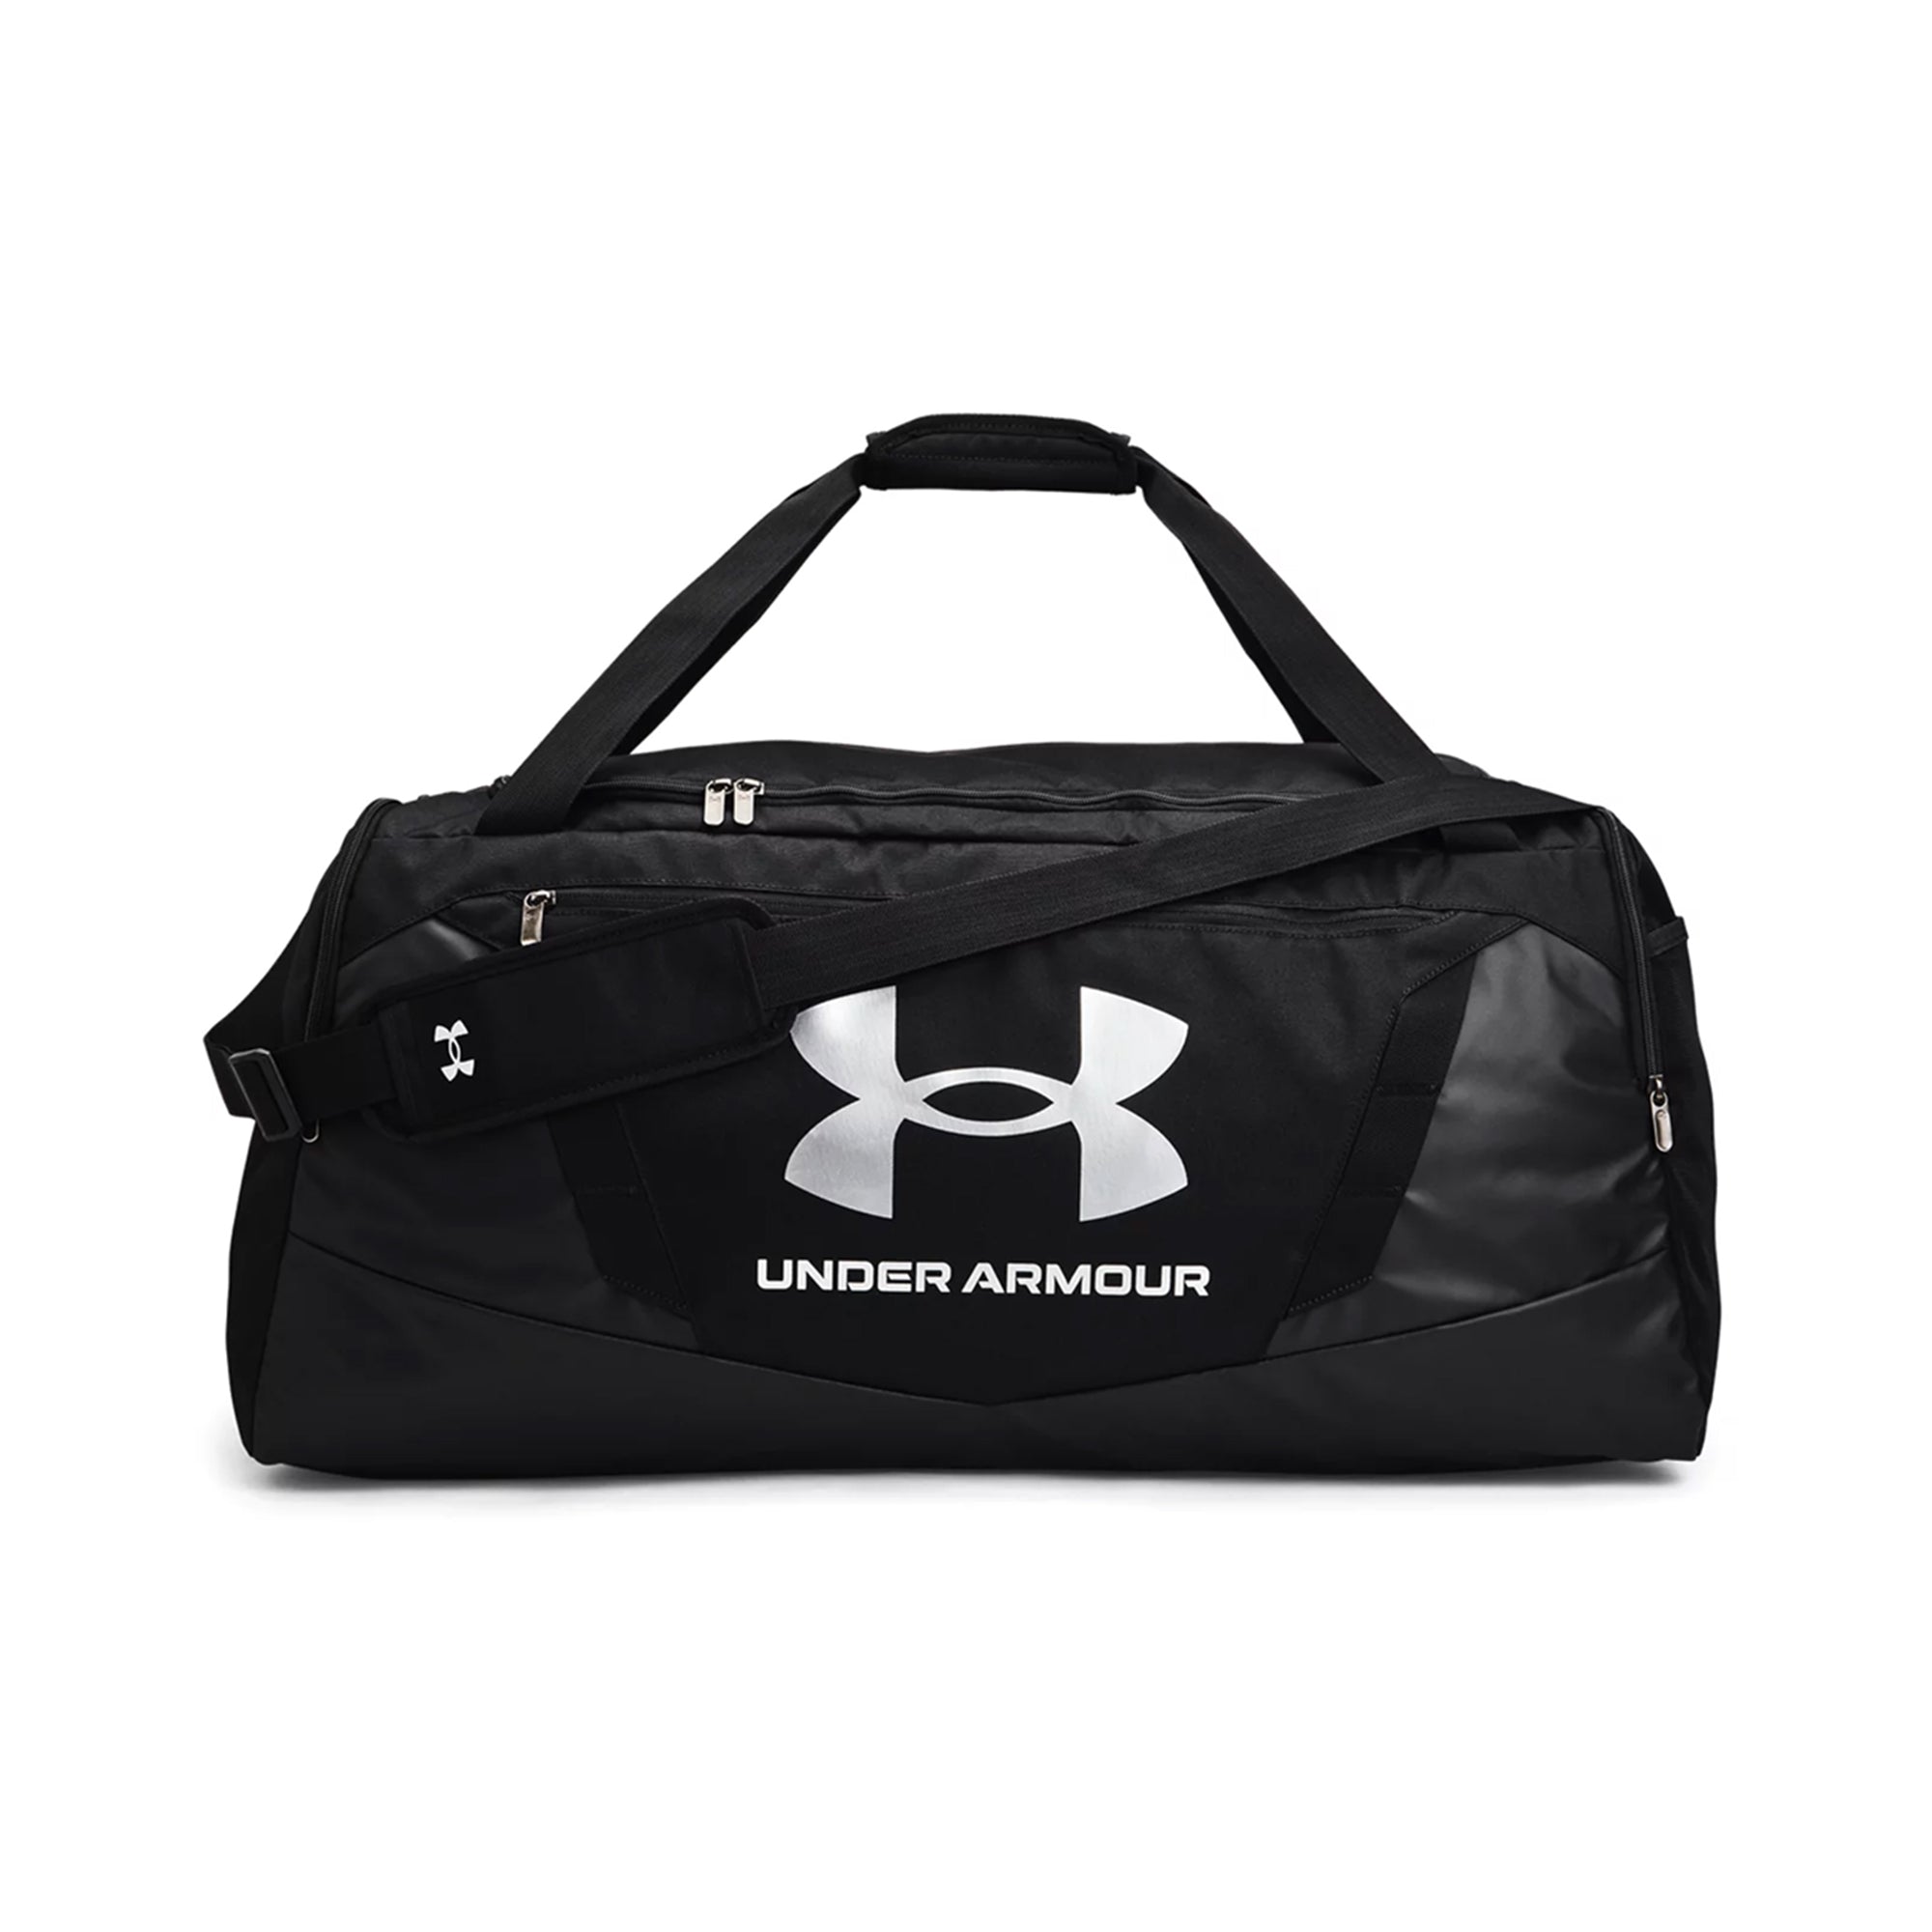 Under Armour Undeniable Large Duffle Bag 5.0